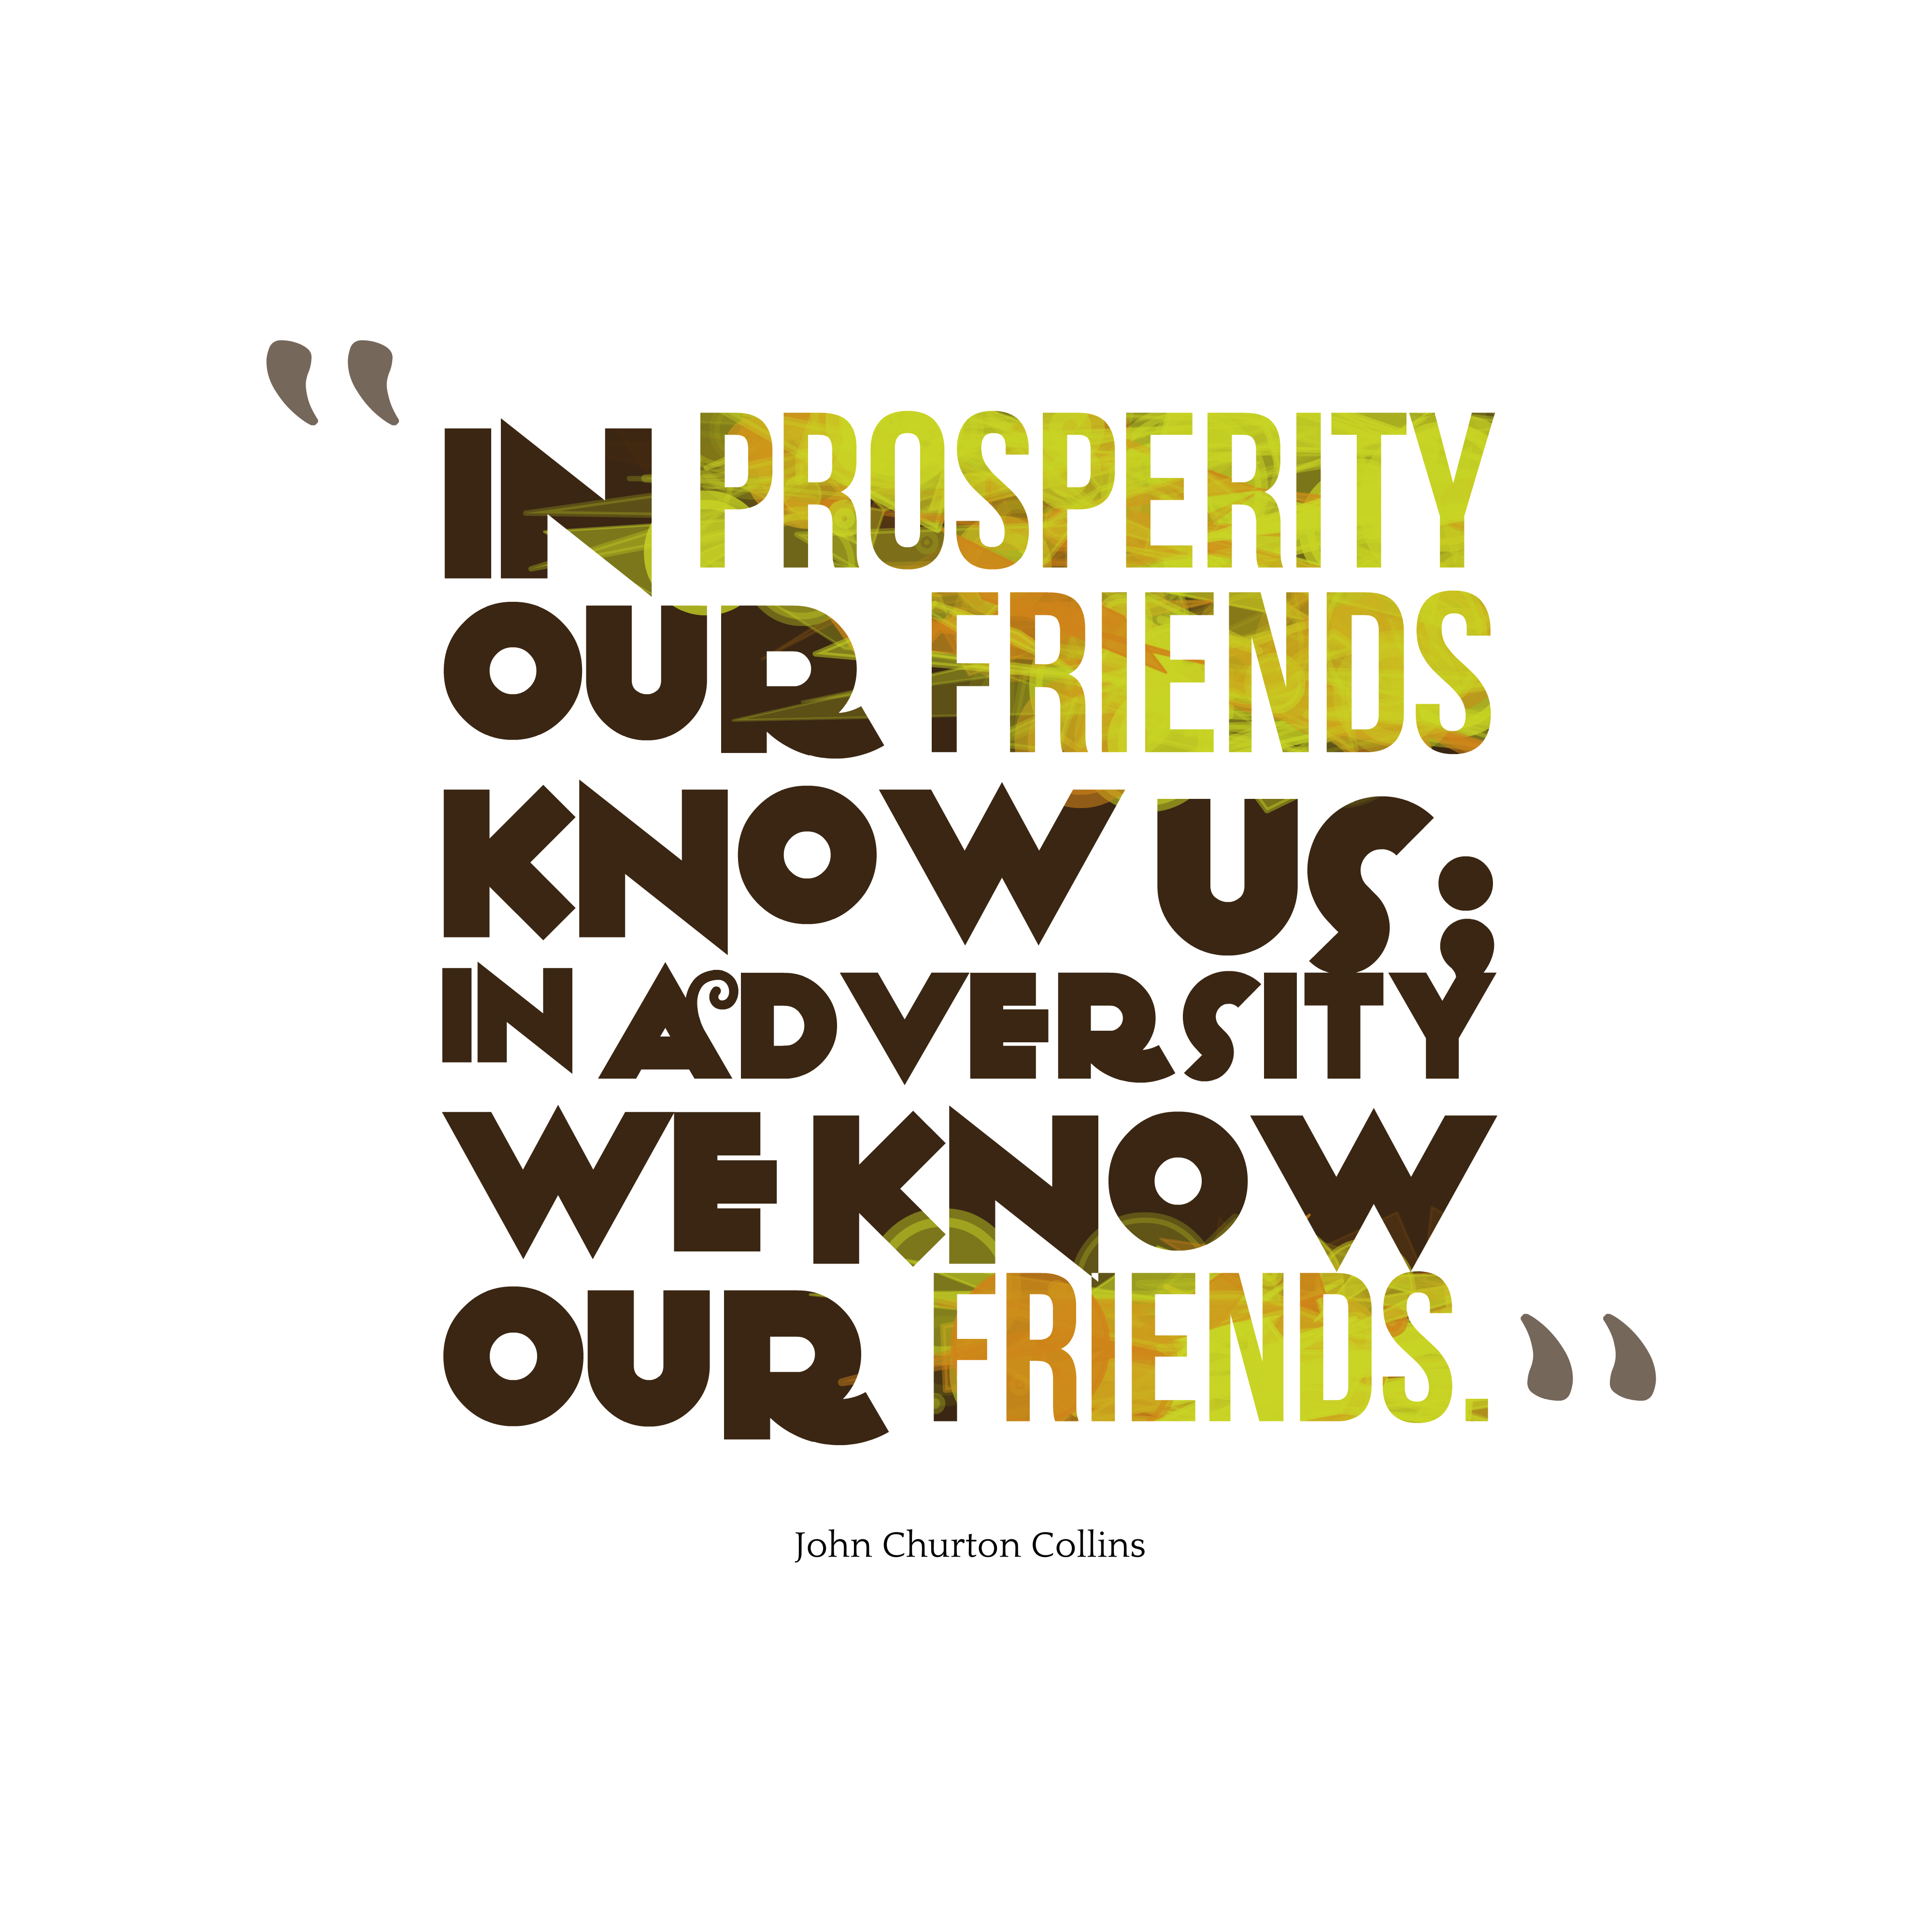 In prosperity, our friends know us; in adversity, we know our friends. John Churton Collins